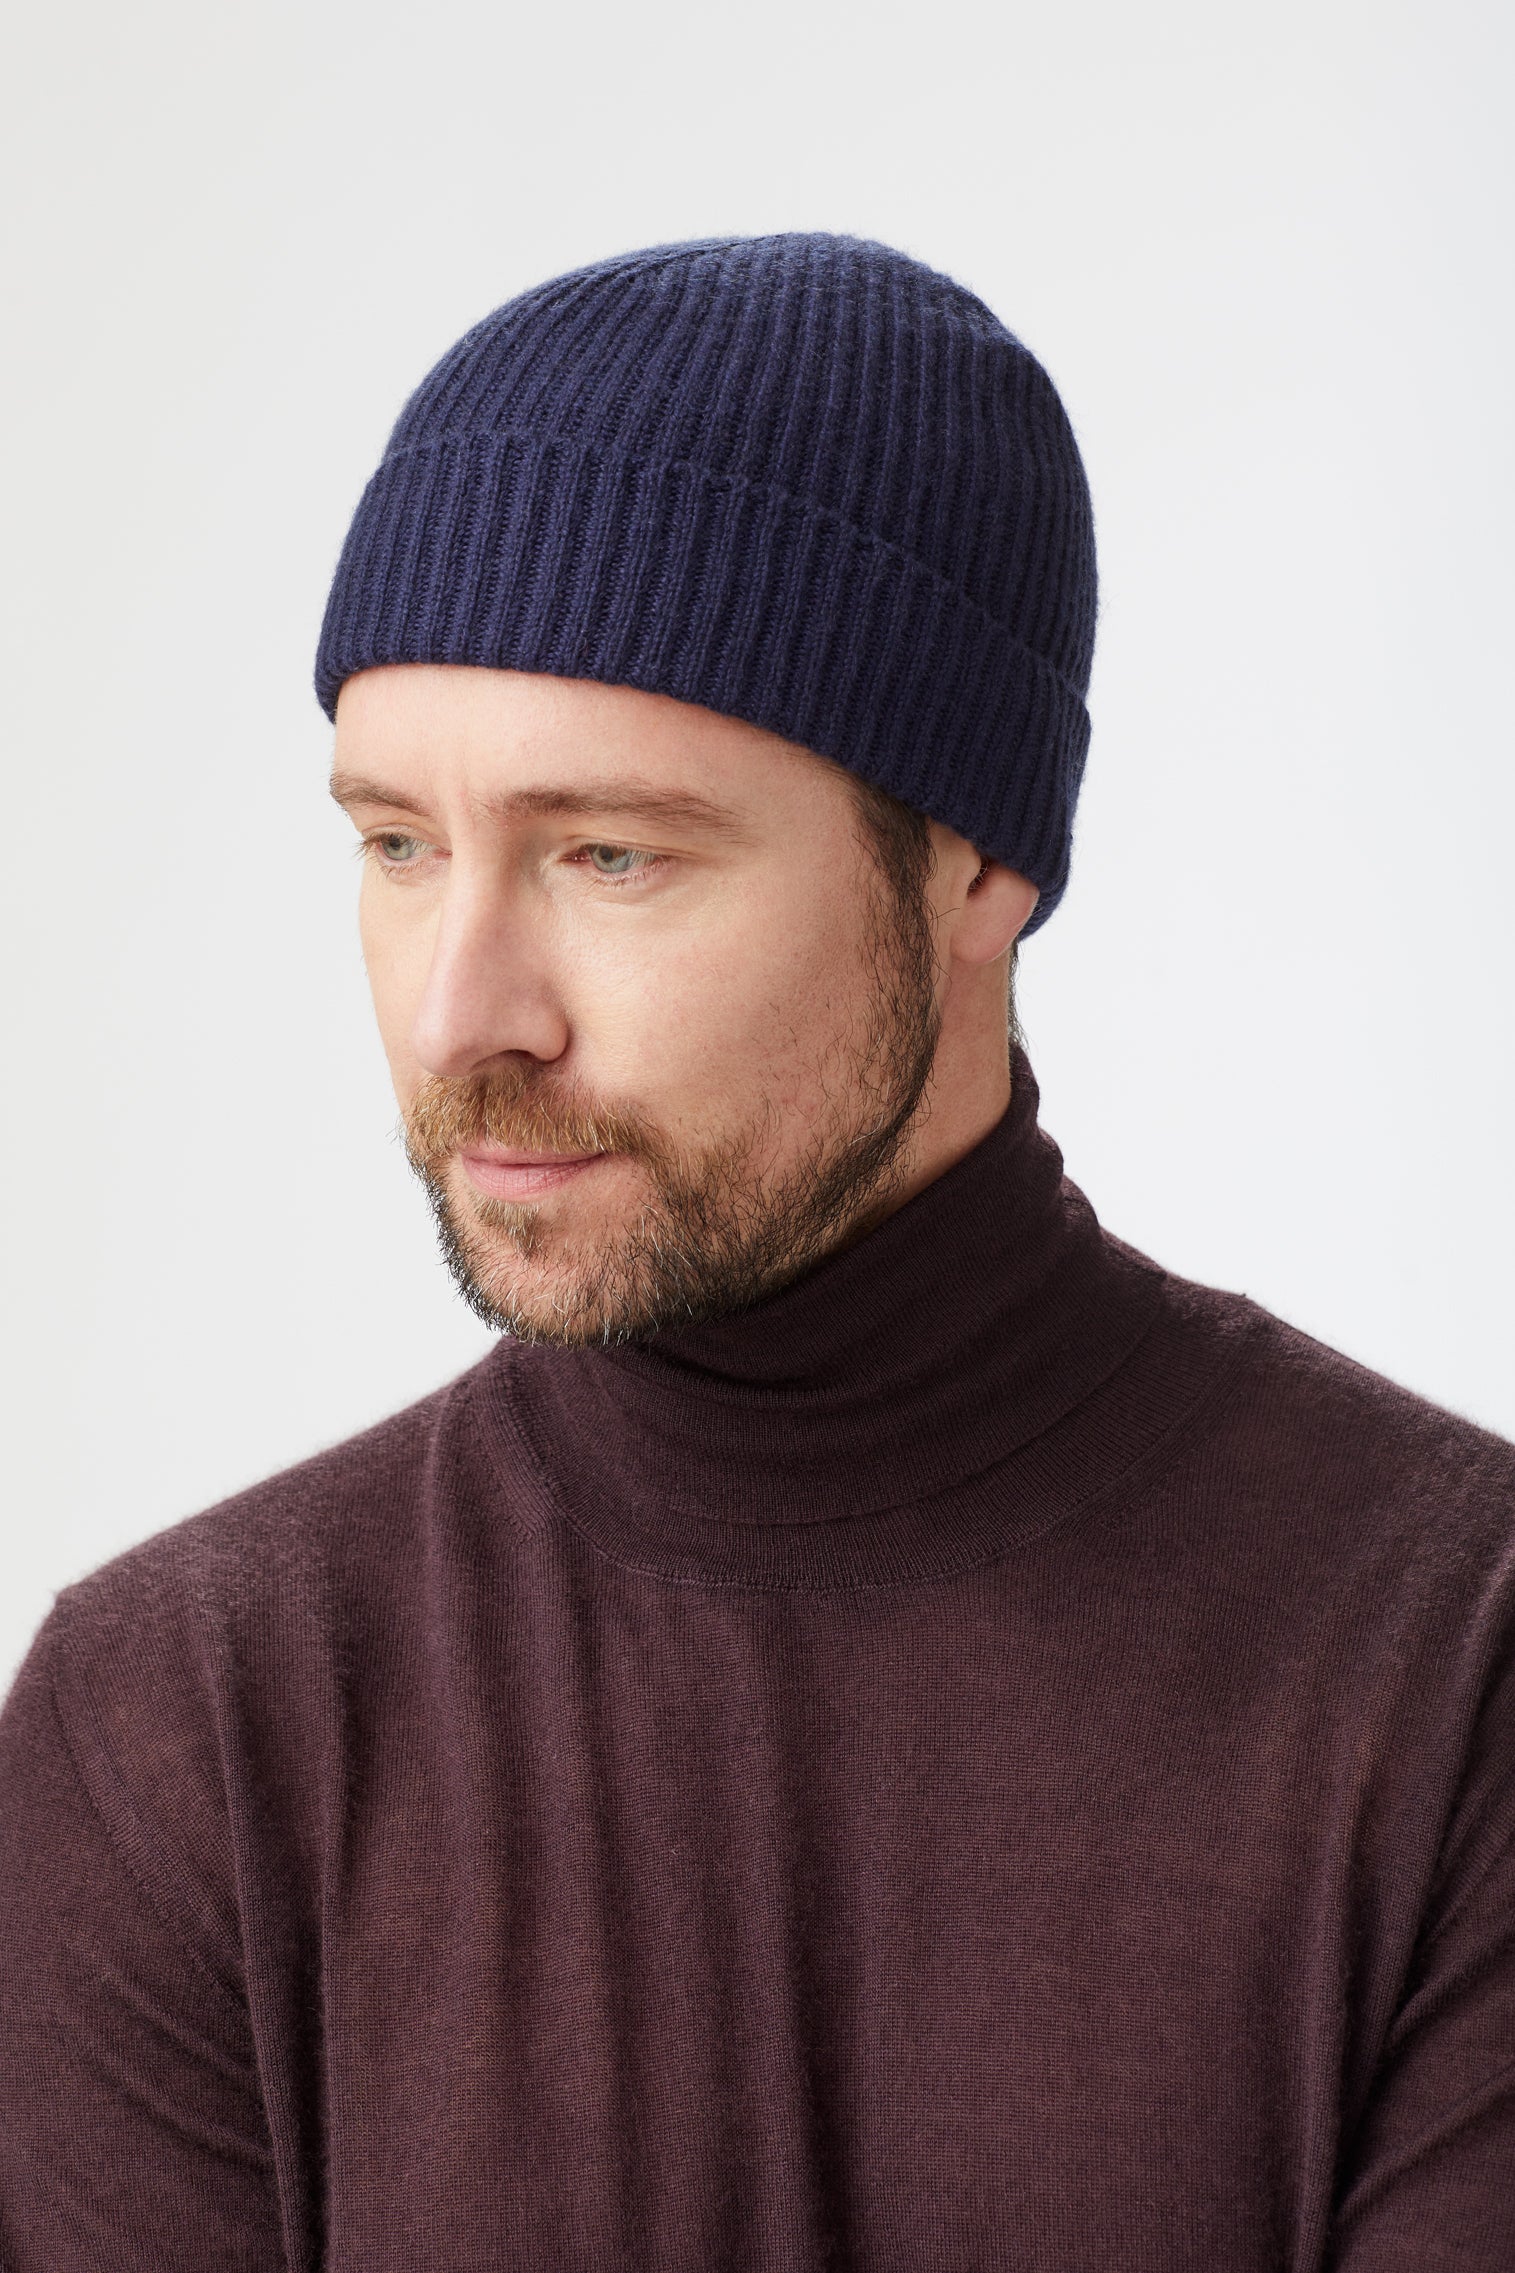 Blue Cashmere Ski Beanie - Hats for Round Face Shapes - Lock & Co. Hatters London UK